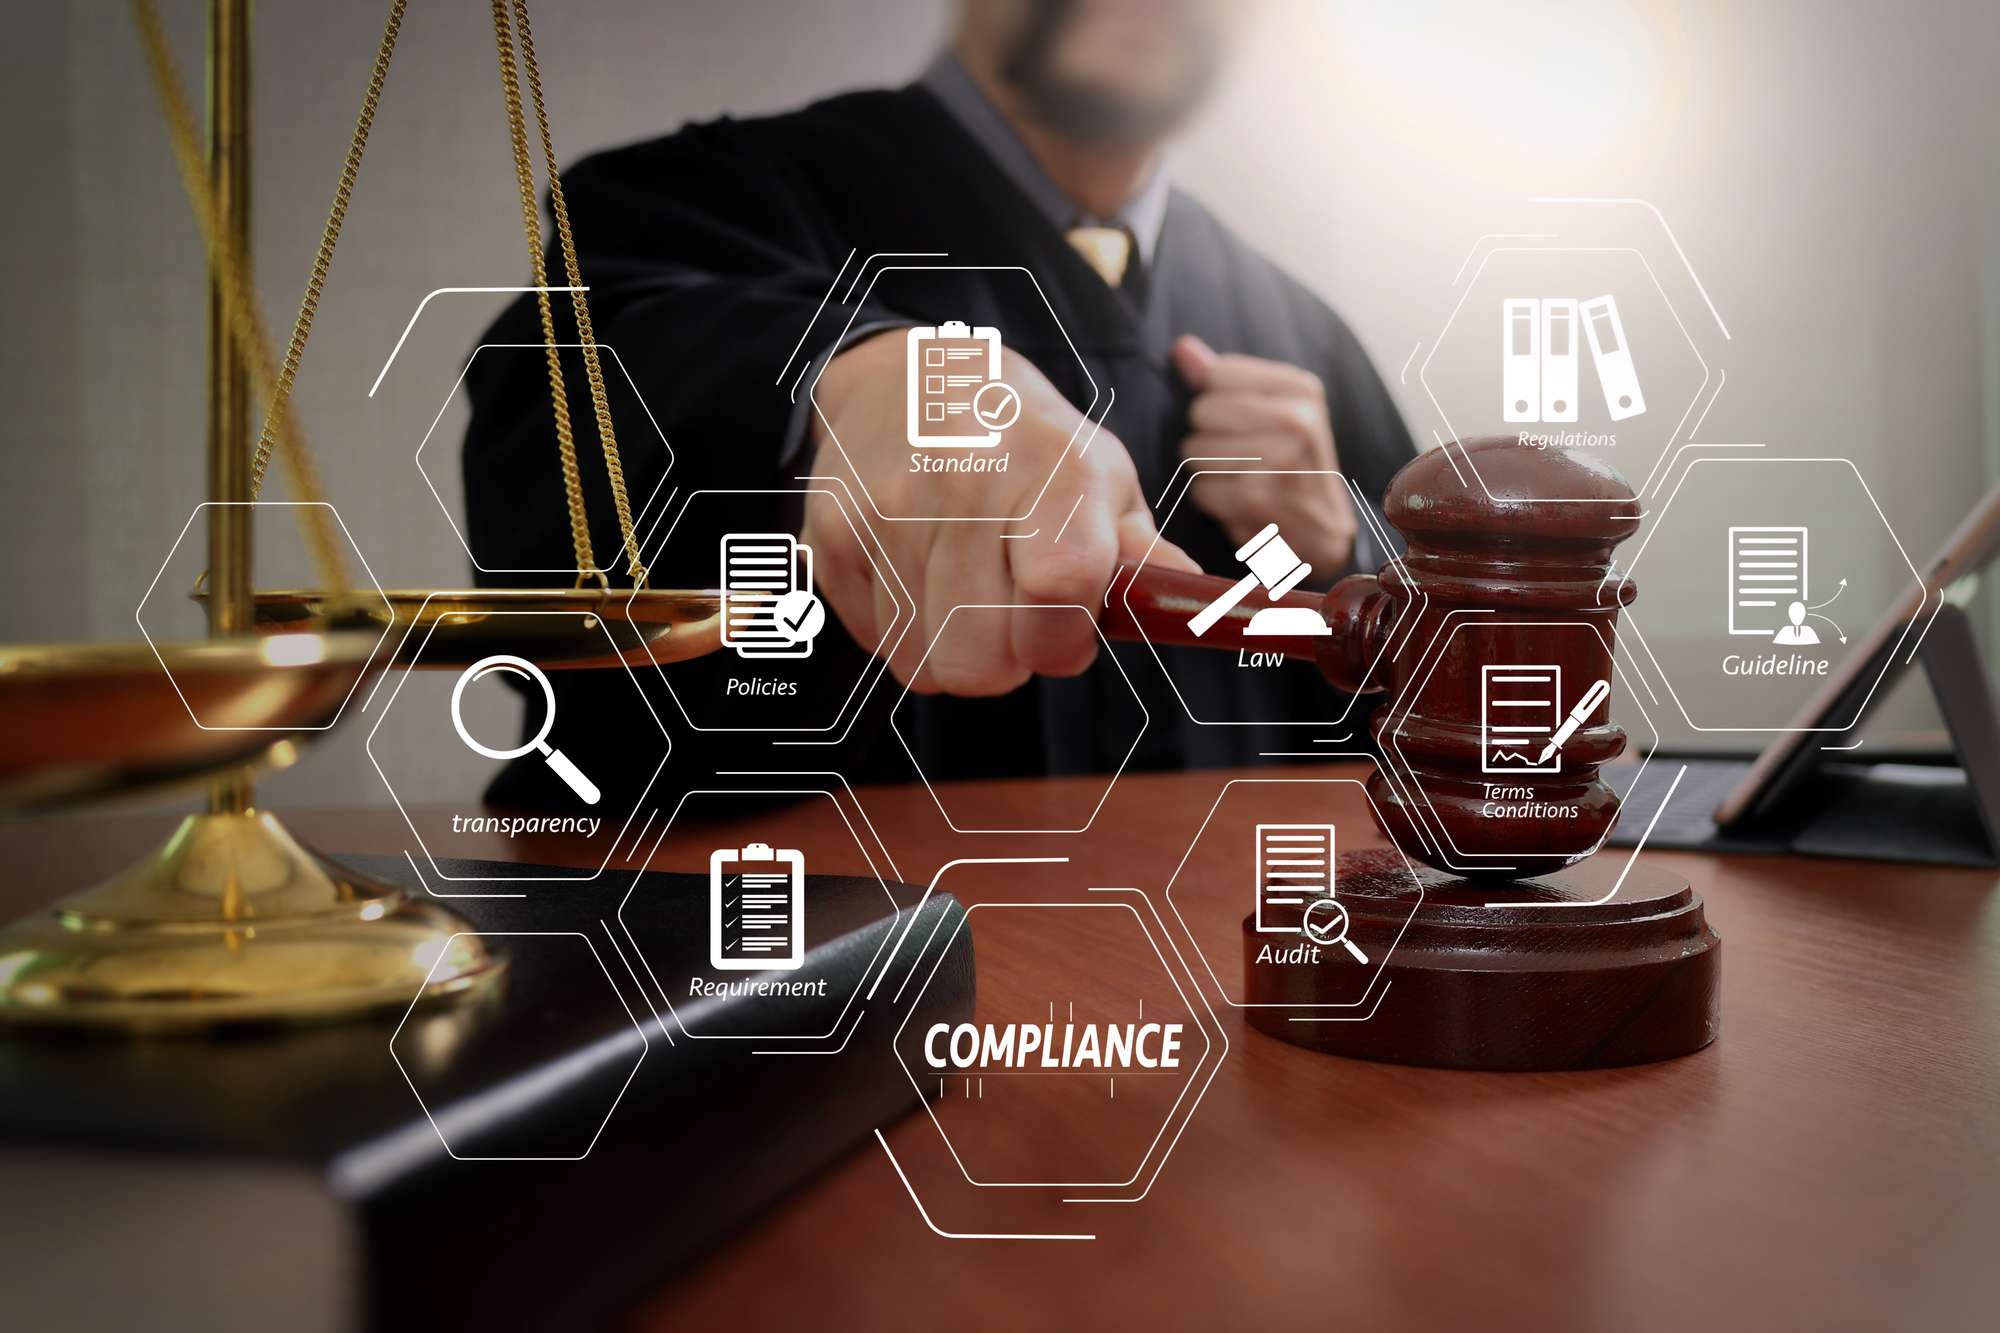 IT standards and legal compliance